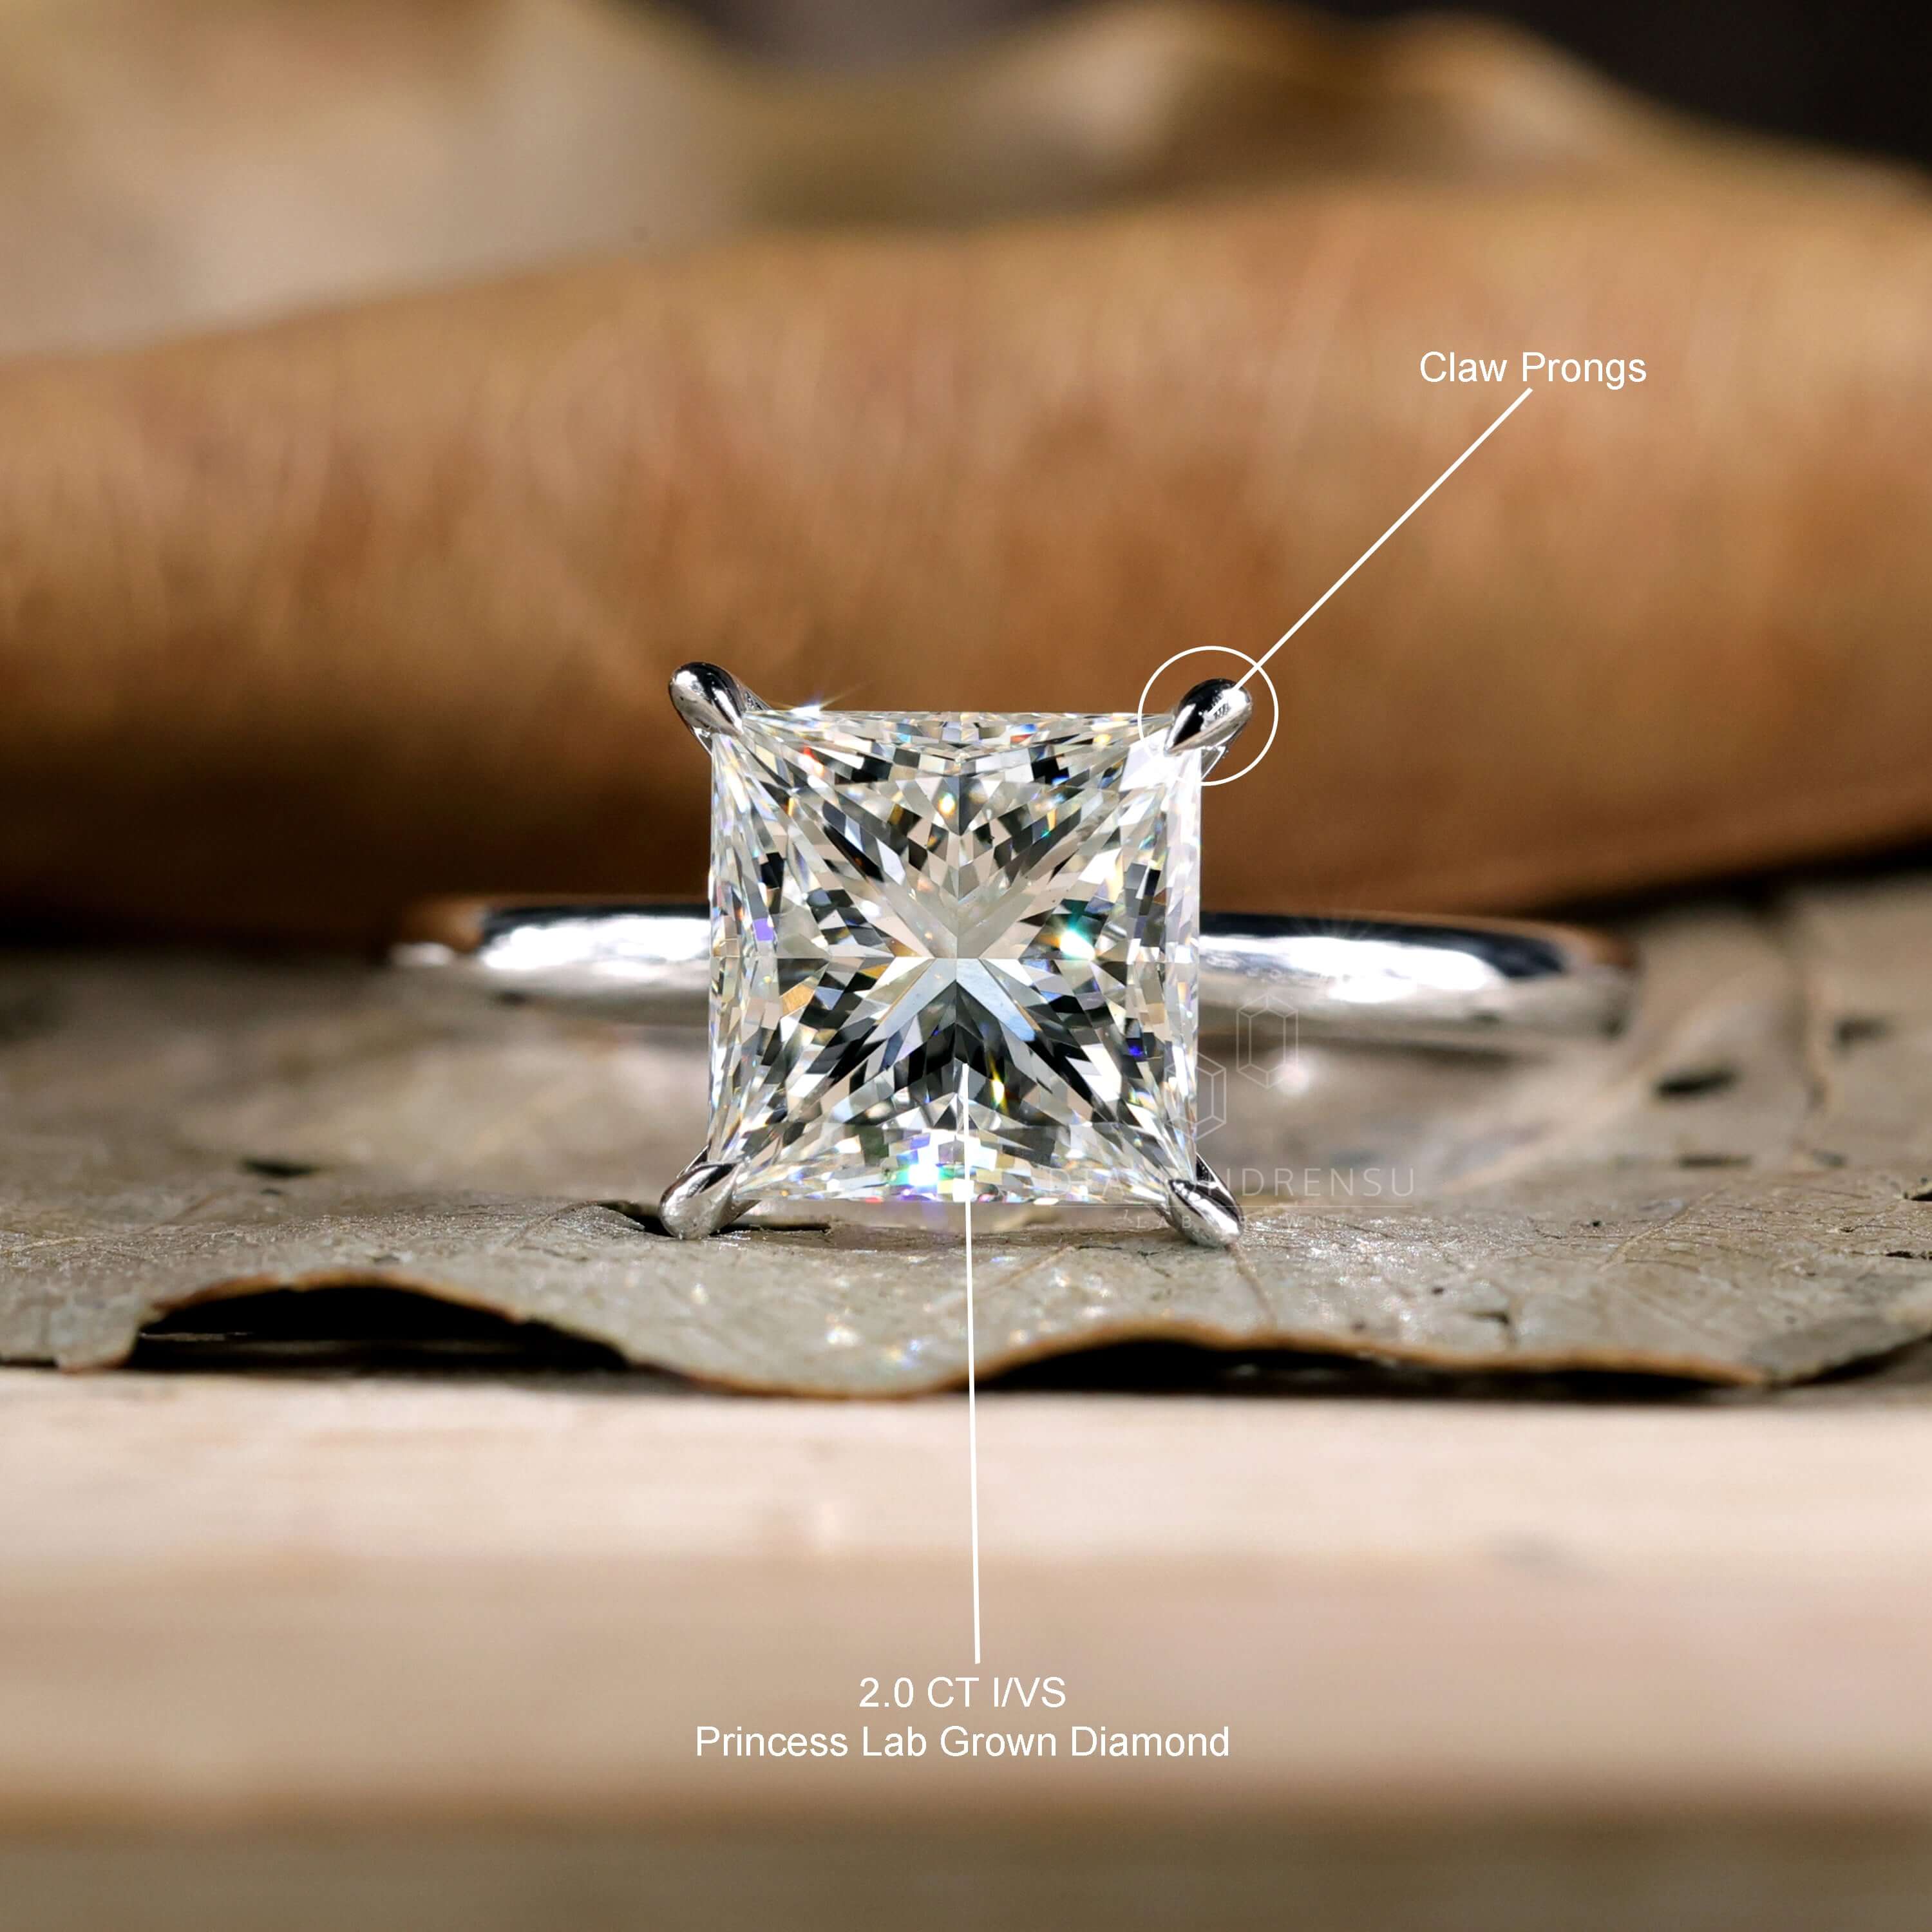 The Perfect Solitaire Diamond Engagement Ring to Steal Her Heart